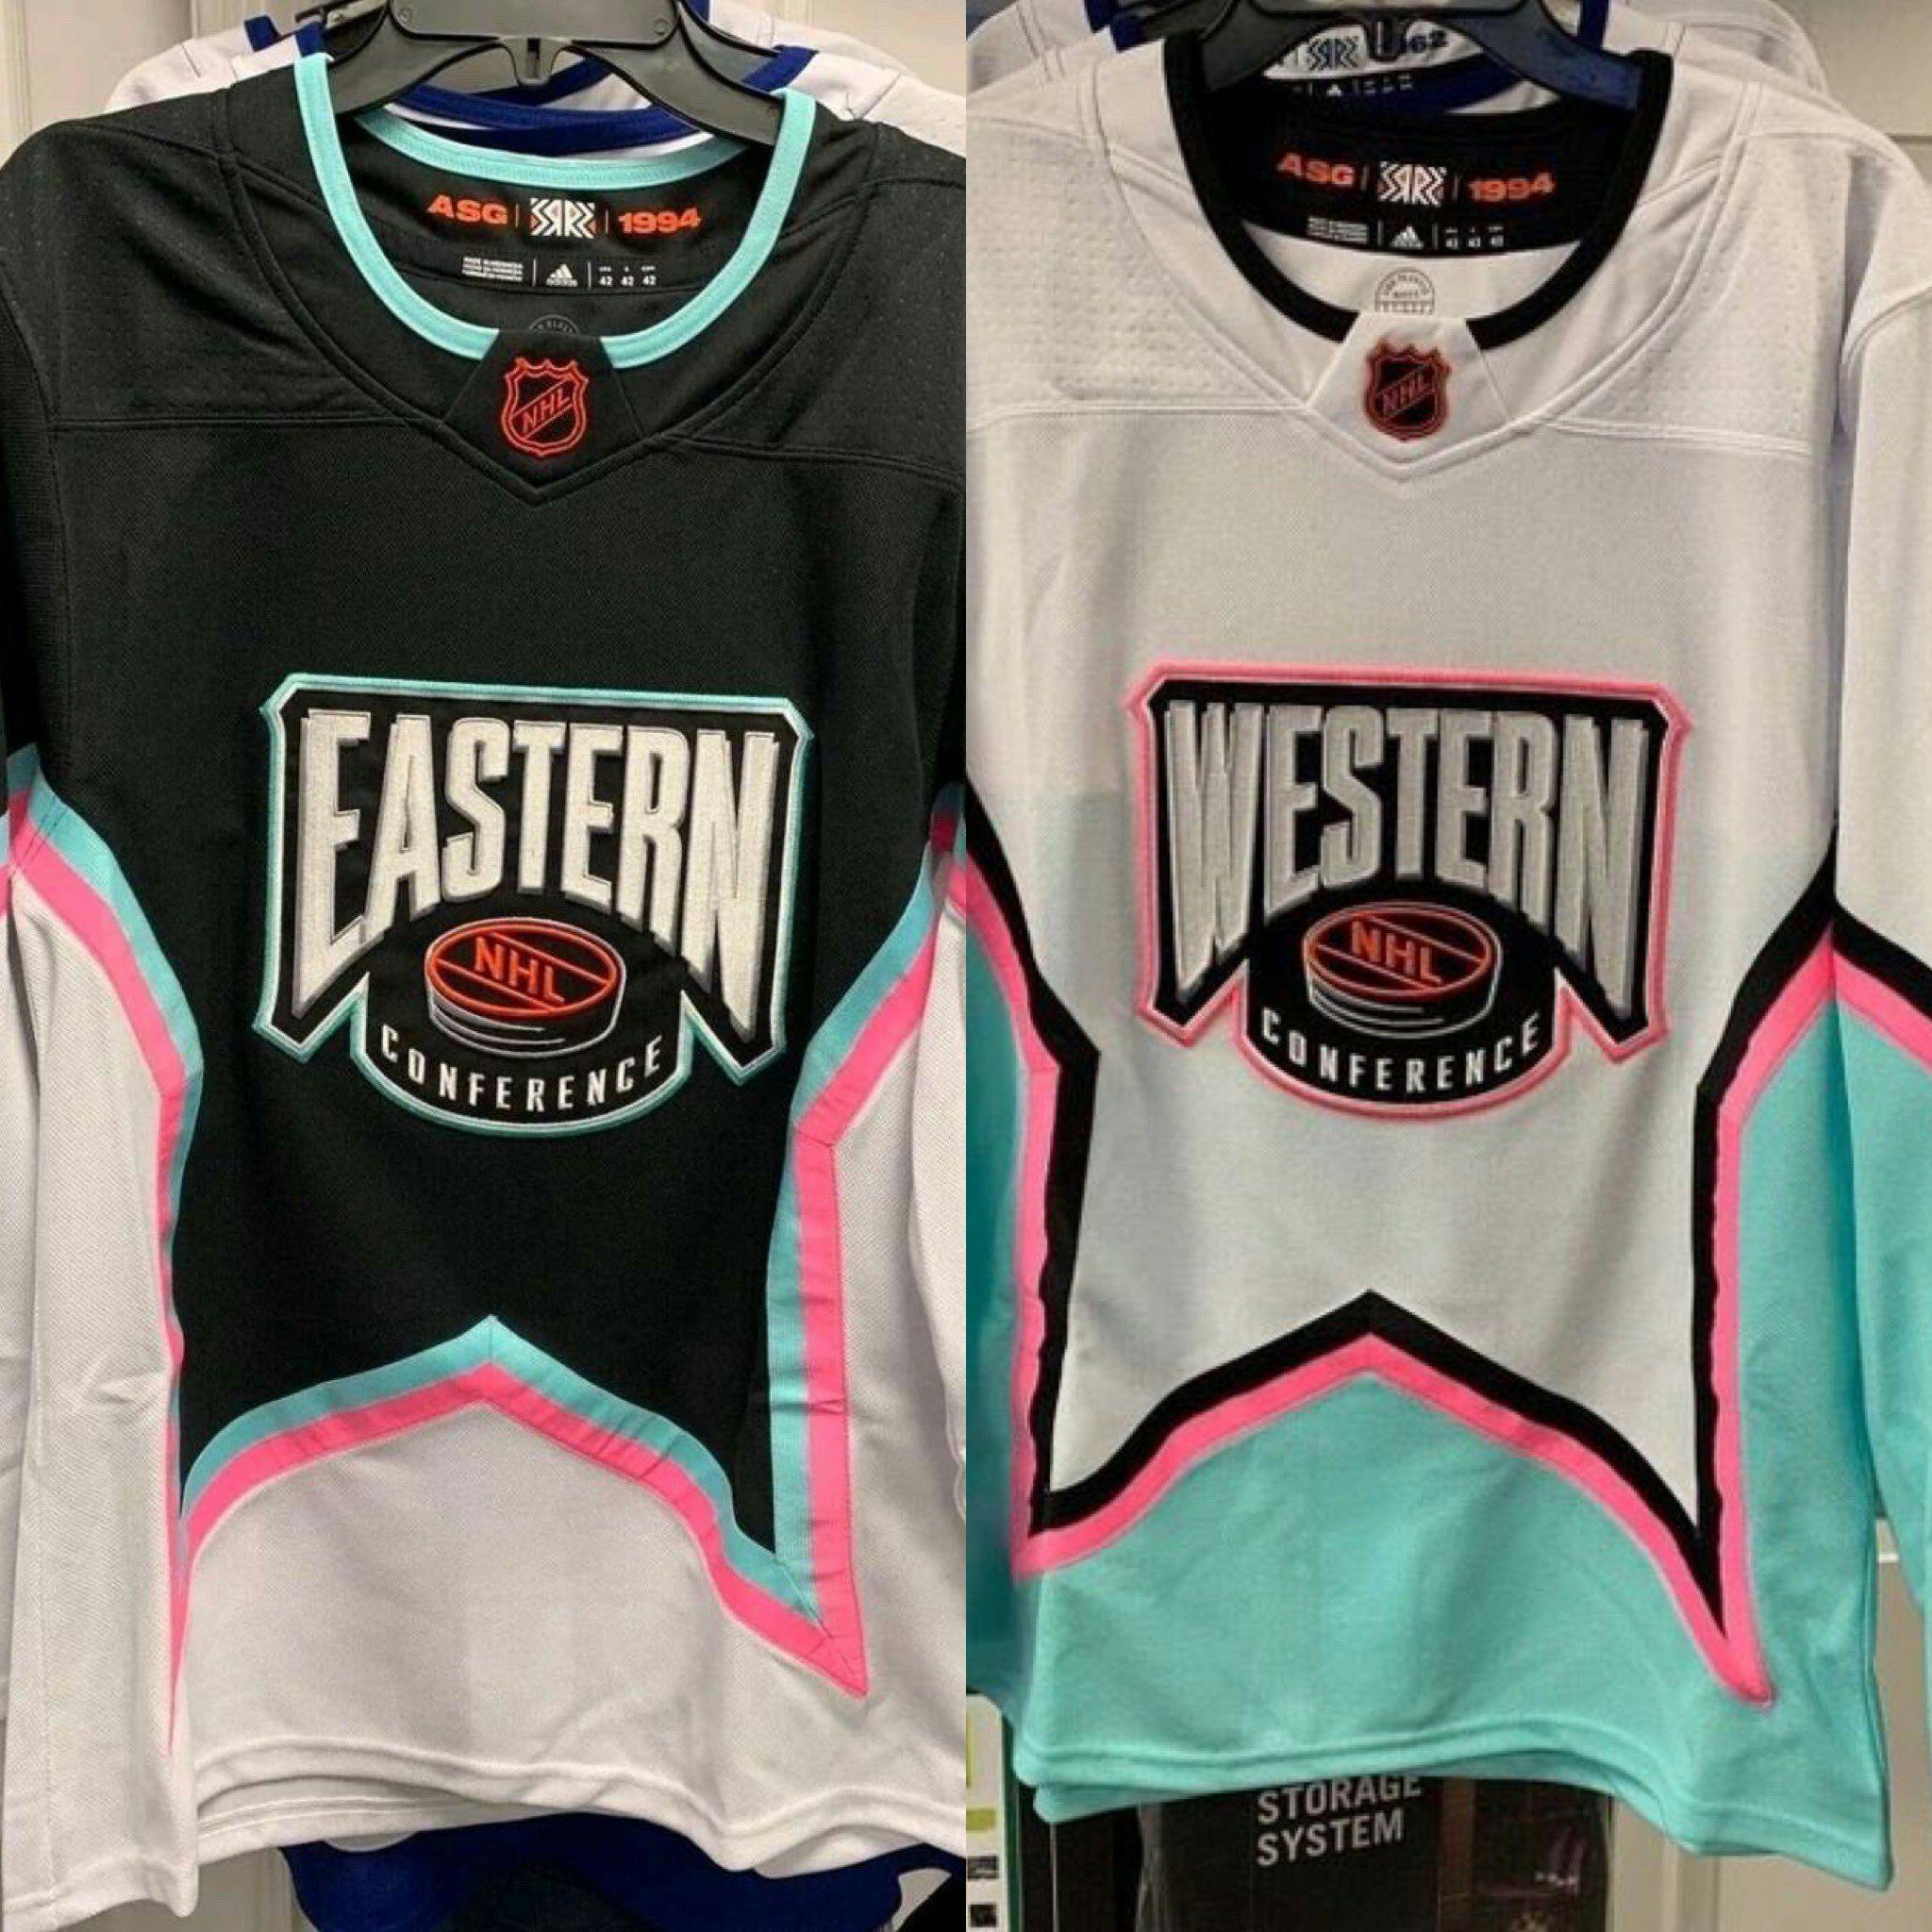 Concept for the 2023 All-Star jerseys based off the leak. Done by